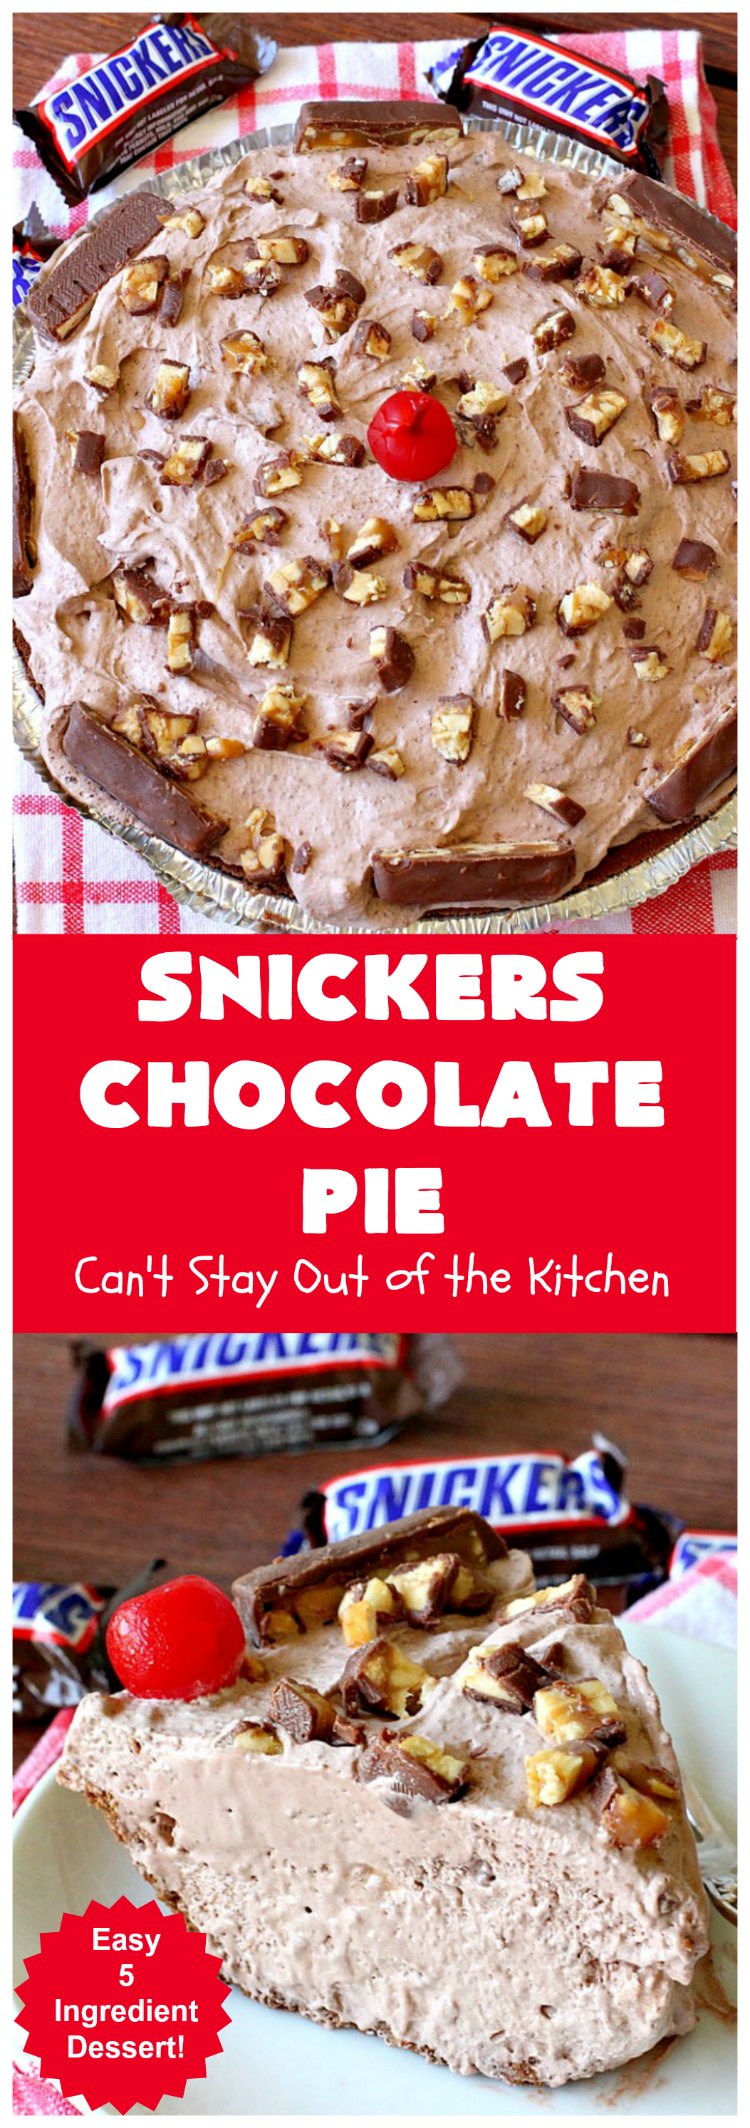 Snickers Chocolate Pie | Can't Stay Out of the Kitchen